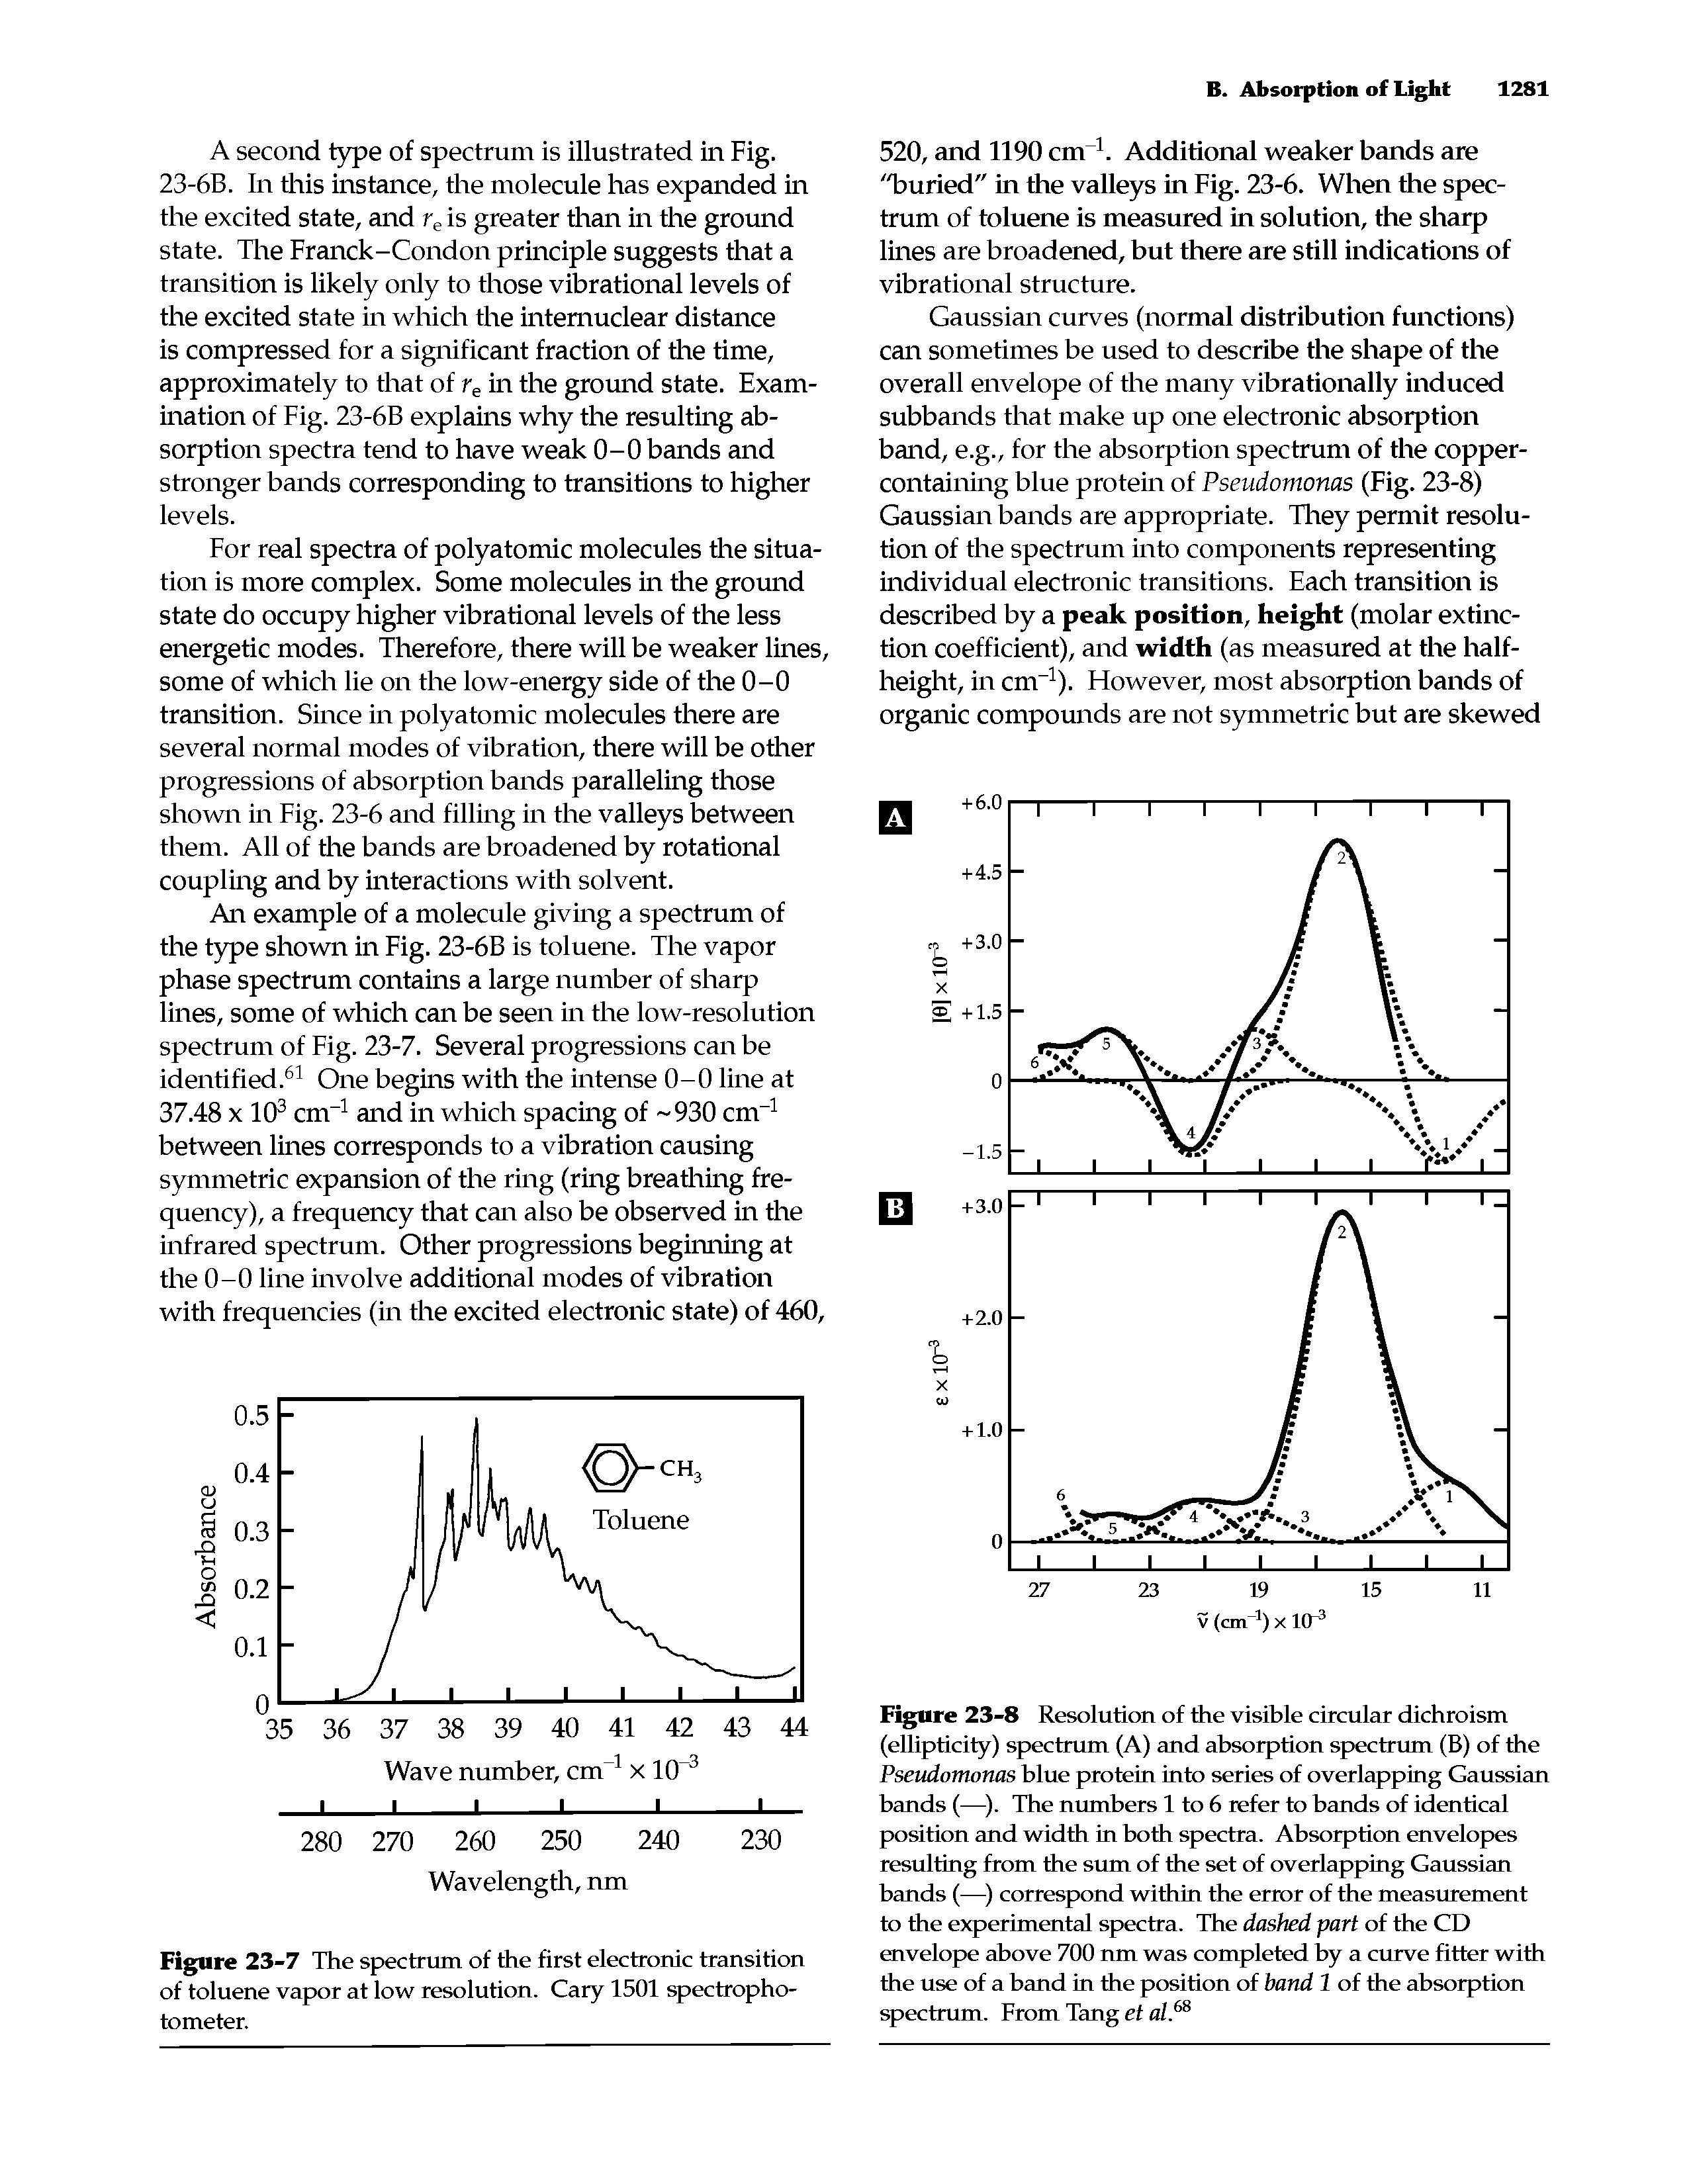 Figure 23-8 Resolution of the visible circular dichroism (ellipticity) spectrum (A) and absorption spectrum (B) of the Pseudomonas blue protein into series of overlapping Gaussian hands (—). The numbers 1 to 6 refer to hands of identical position and width in both spectra. Absorption envelopes resulting from the sum of the set of overlapping Gaussian bands (—) correspond within the error of the measurement to the experimental spectra. The dashed part of the CD envelope above 700 nm was completed by a curve fitter with the use of a band in the position of hand 1 of the absorption spectrum. From Tang et al.68...